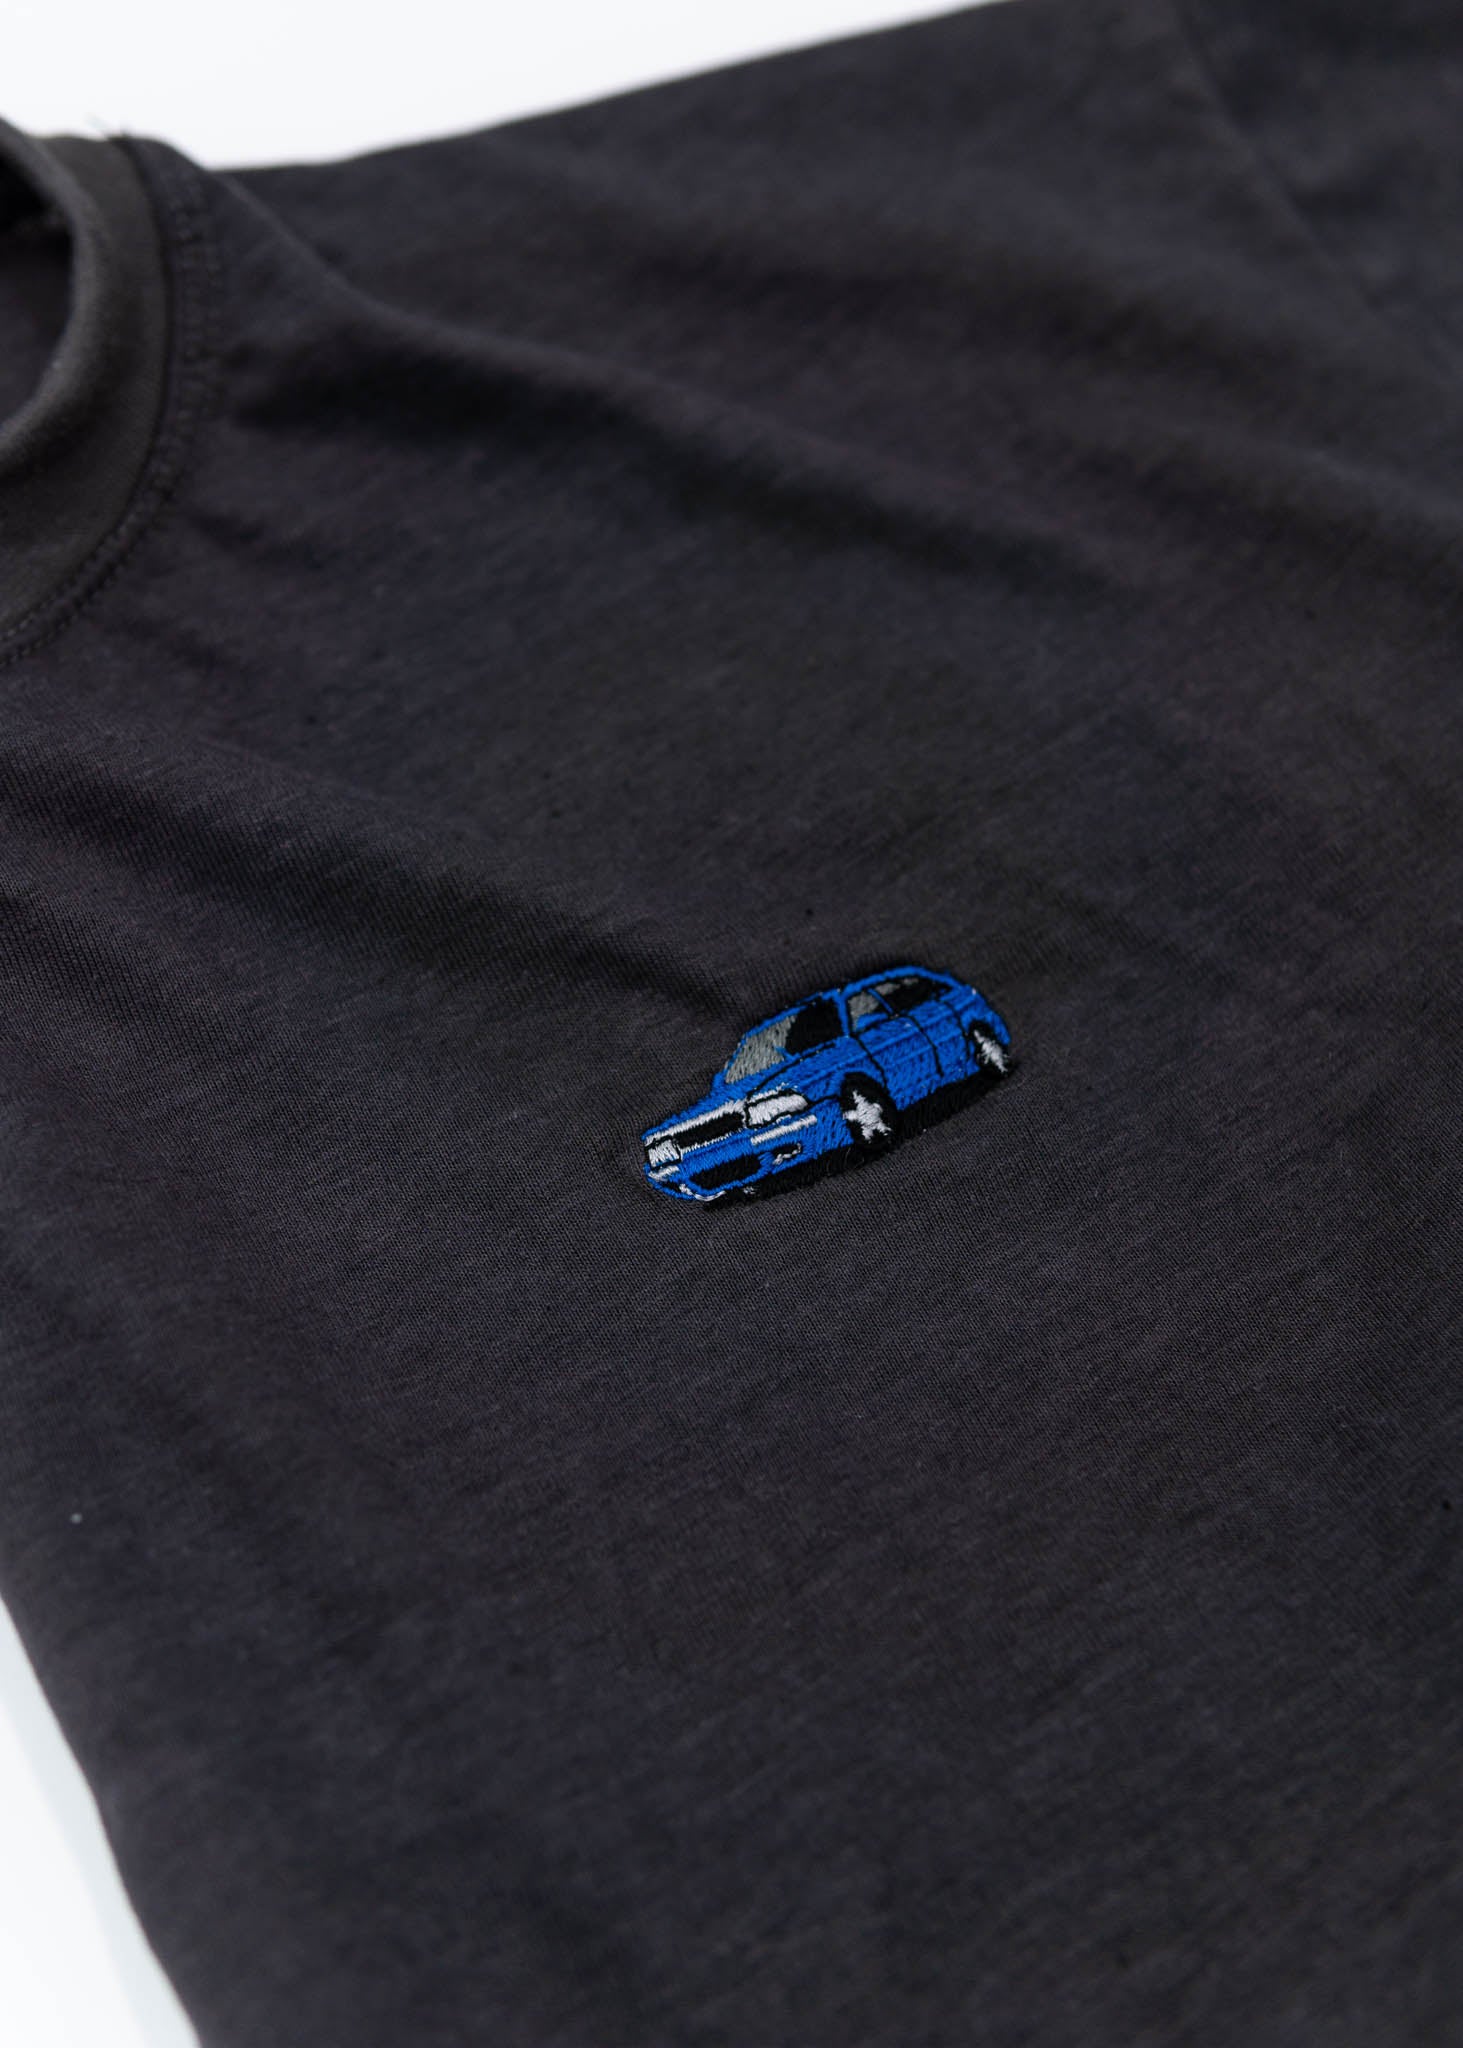 A dark grey cropped t-shirt for Audi women. Close up view of a 100% cotton crop tee with an embroidered Nogaro Blue Audi 80 RS2 Avant made by Porsche. The material is stretchy, and non-transparent with a crewneck neckline and short sleeves.